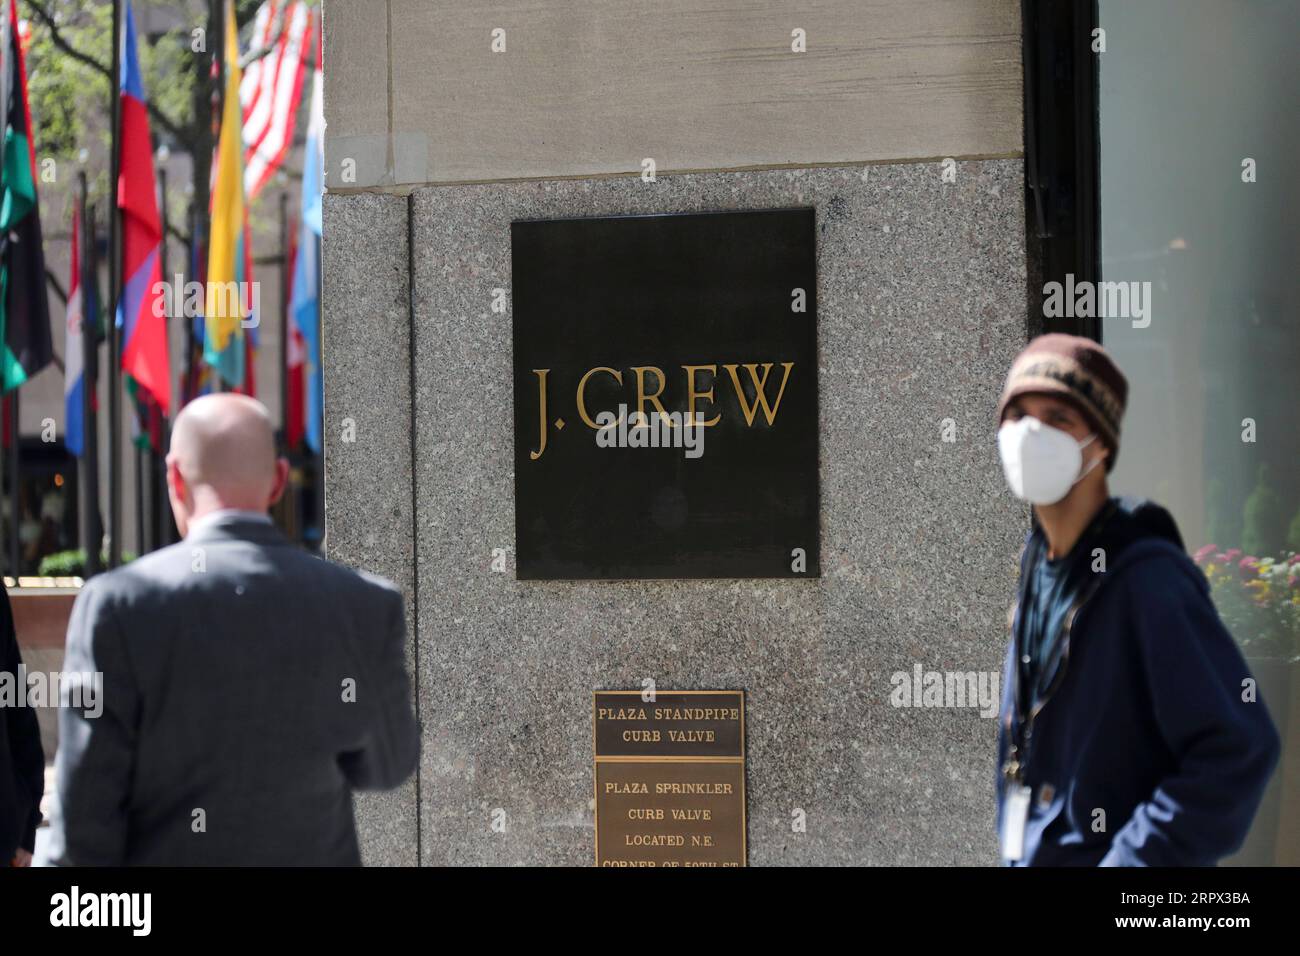 200505 -- NEW YORK, May 5, 2020 -- Pedestrians walk past a J.Crew store in Manhattan of New York, the United States, May 4, 2020. J. Crew Group, a U.S. apparel retailer which also operates the Madewell brand, has filed for bankruptcy protection, as the COVID-19 fallout continues to ripple through the nation. It has filed to begin Chapter 11 proceedings in the U.S. Bankruptcy Court for the Eastern District of Virginia, according to a statement by the company on Monday. The company said its lenders have agreed to convert approximately 1.65 billion U.S. dollars of its debt into equity.  U.S.-NEW Stock Photo